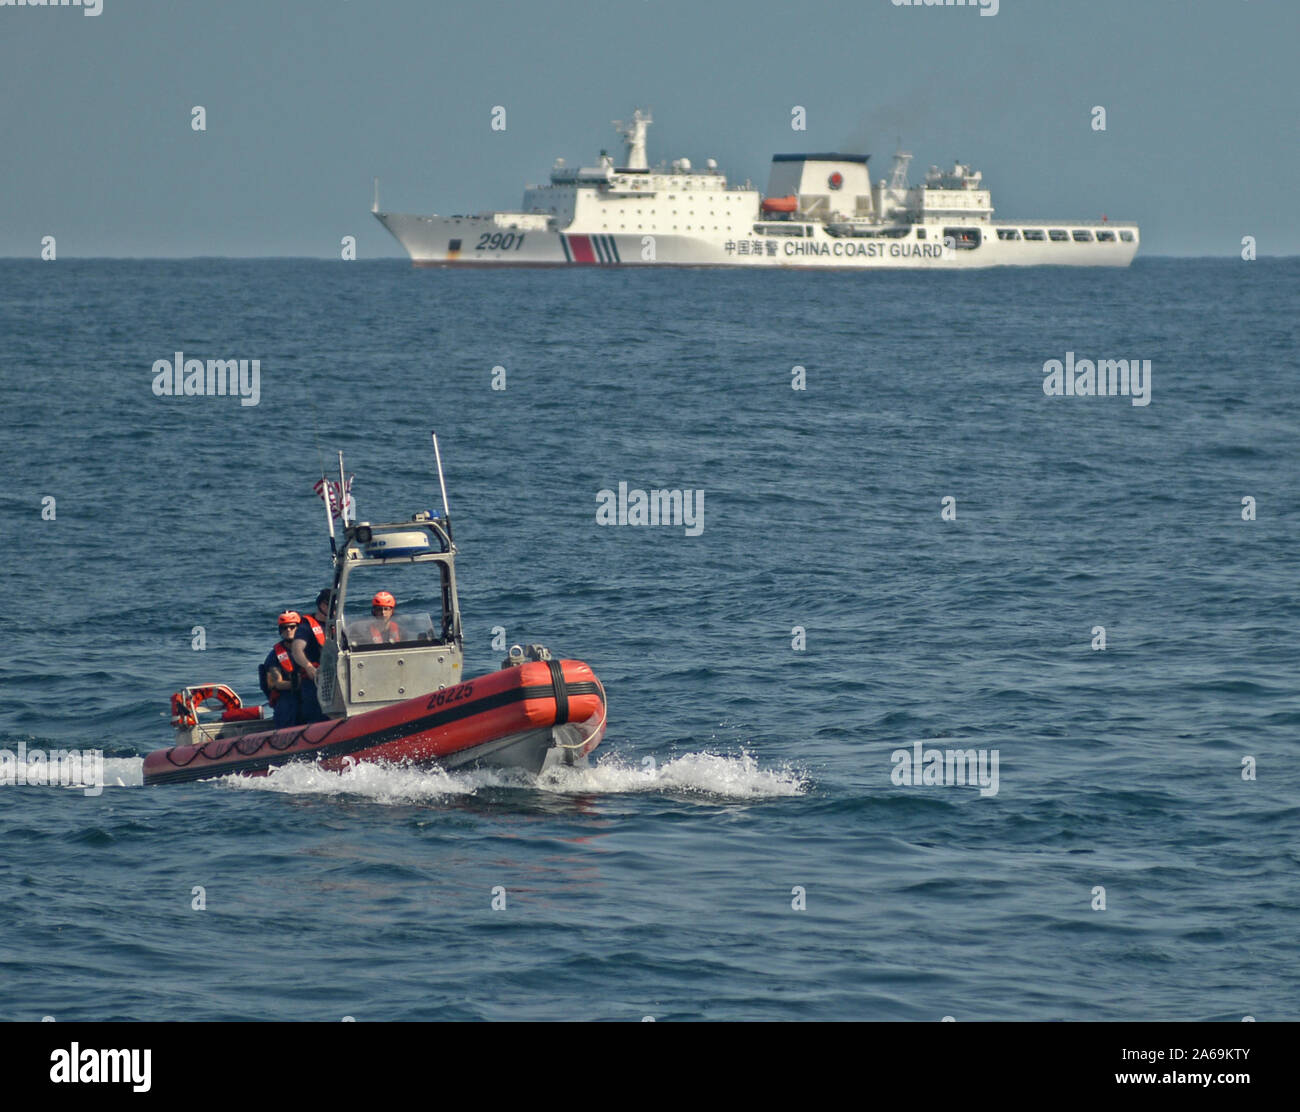 A small boat crew from Coast Guard Cutter Stratton conducts operations in the Yellow Sea Oct. 6, 2019, with a China Coast Guard cutter on the horizon. The Stratton was on a United Nations Security Council Relations patrol as a part of the United States’ ongoing contribution to international efforts in combatting Democratic People's Republic of Korea (DPRK)’s maritime sanctions evasion activity. U.S. Coast Guard photo by PA1 Nate Littlejohn Stock Photo